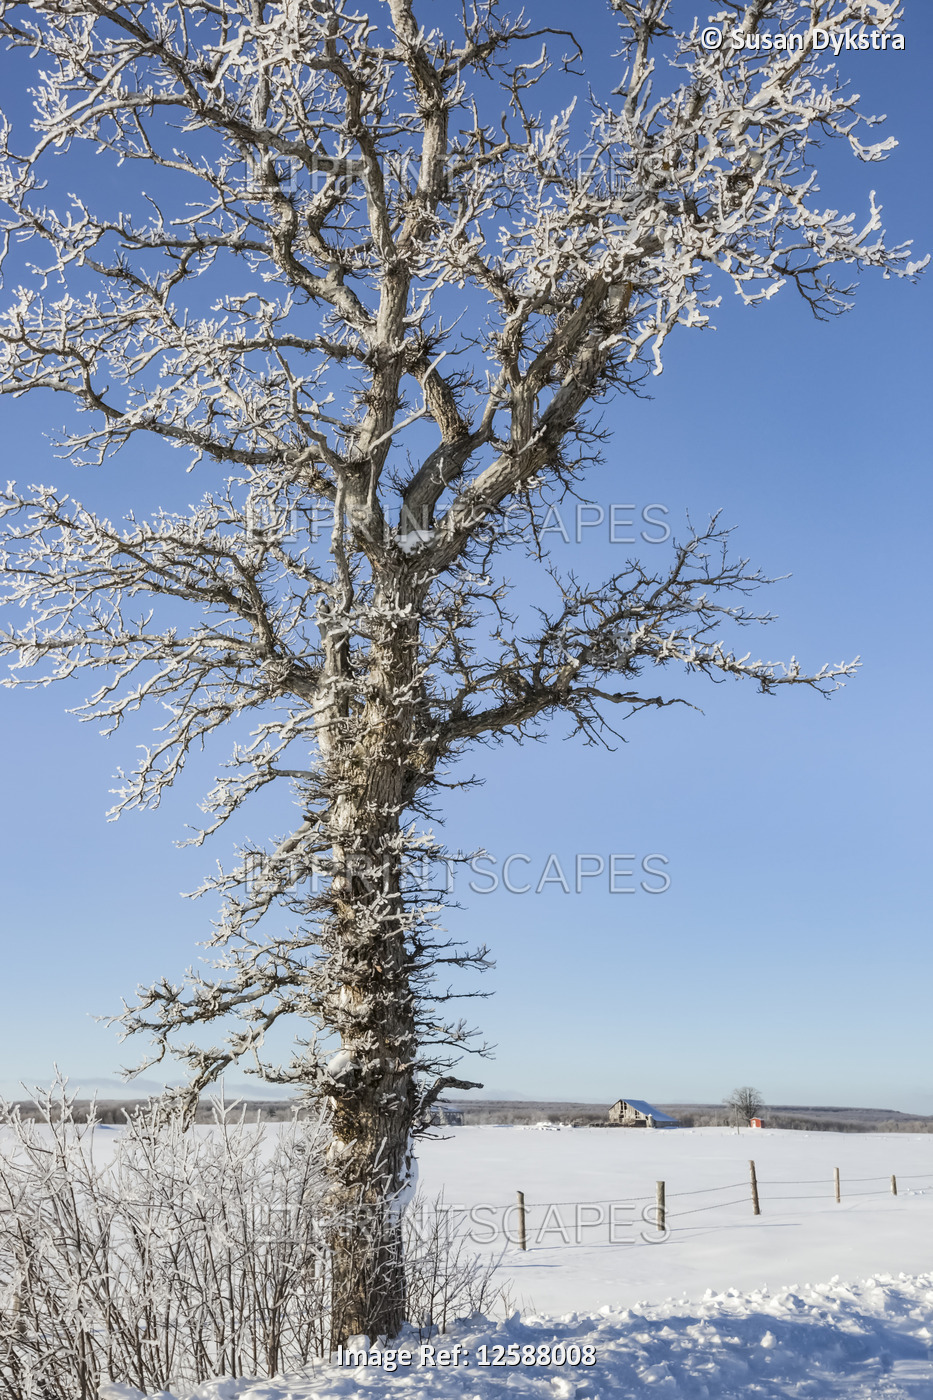 Snowy landscape with tree